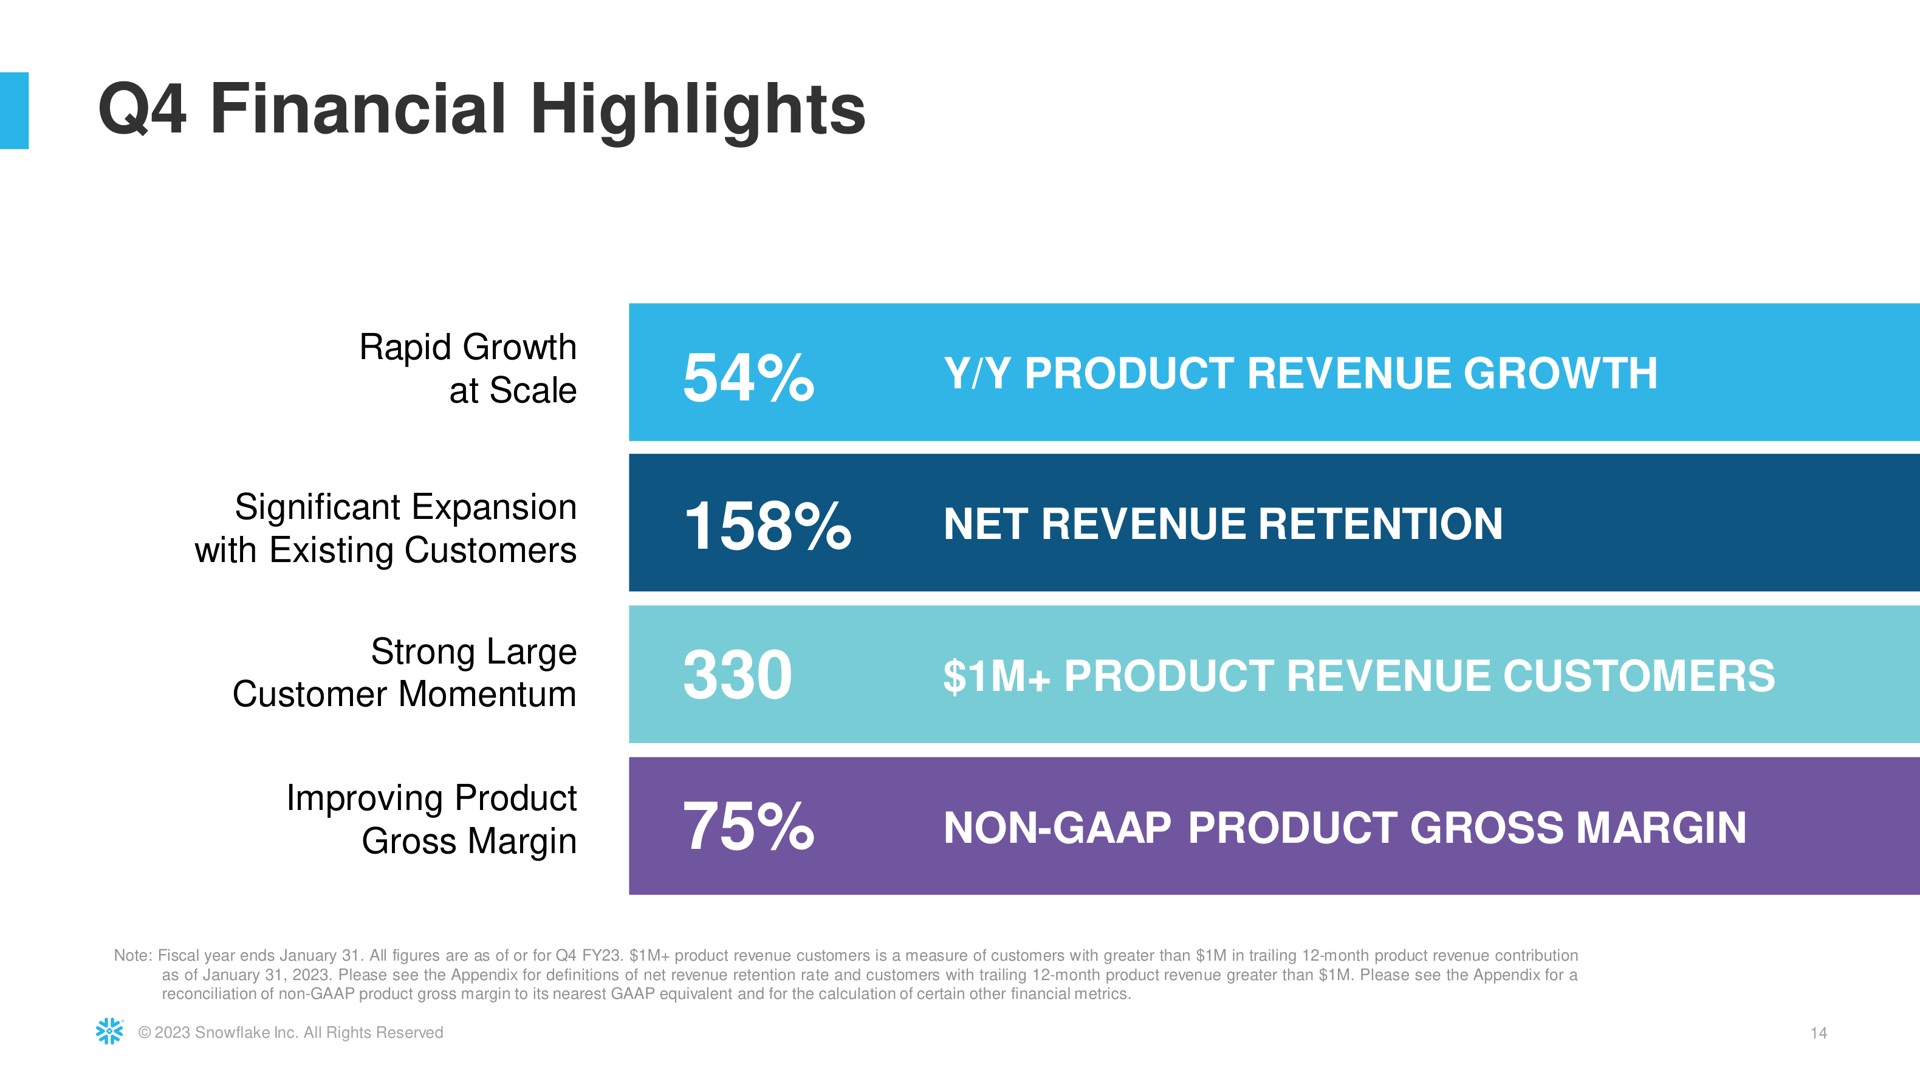 financial highlights significant expansion net revenue retention margin | Snowflake